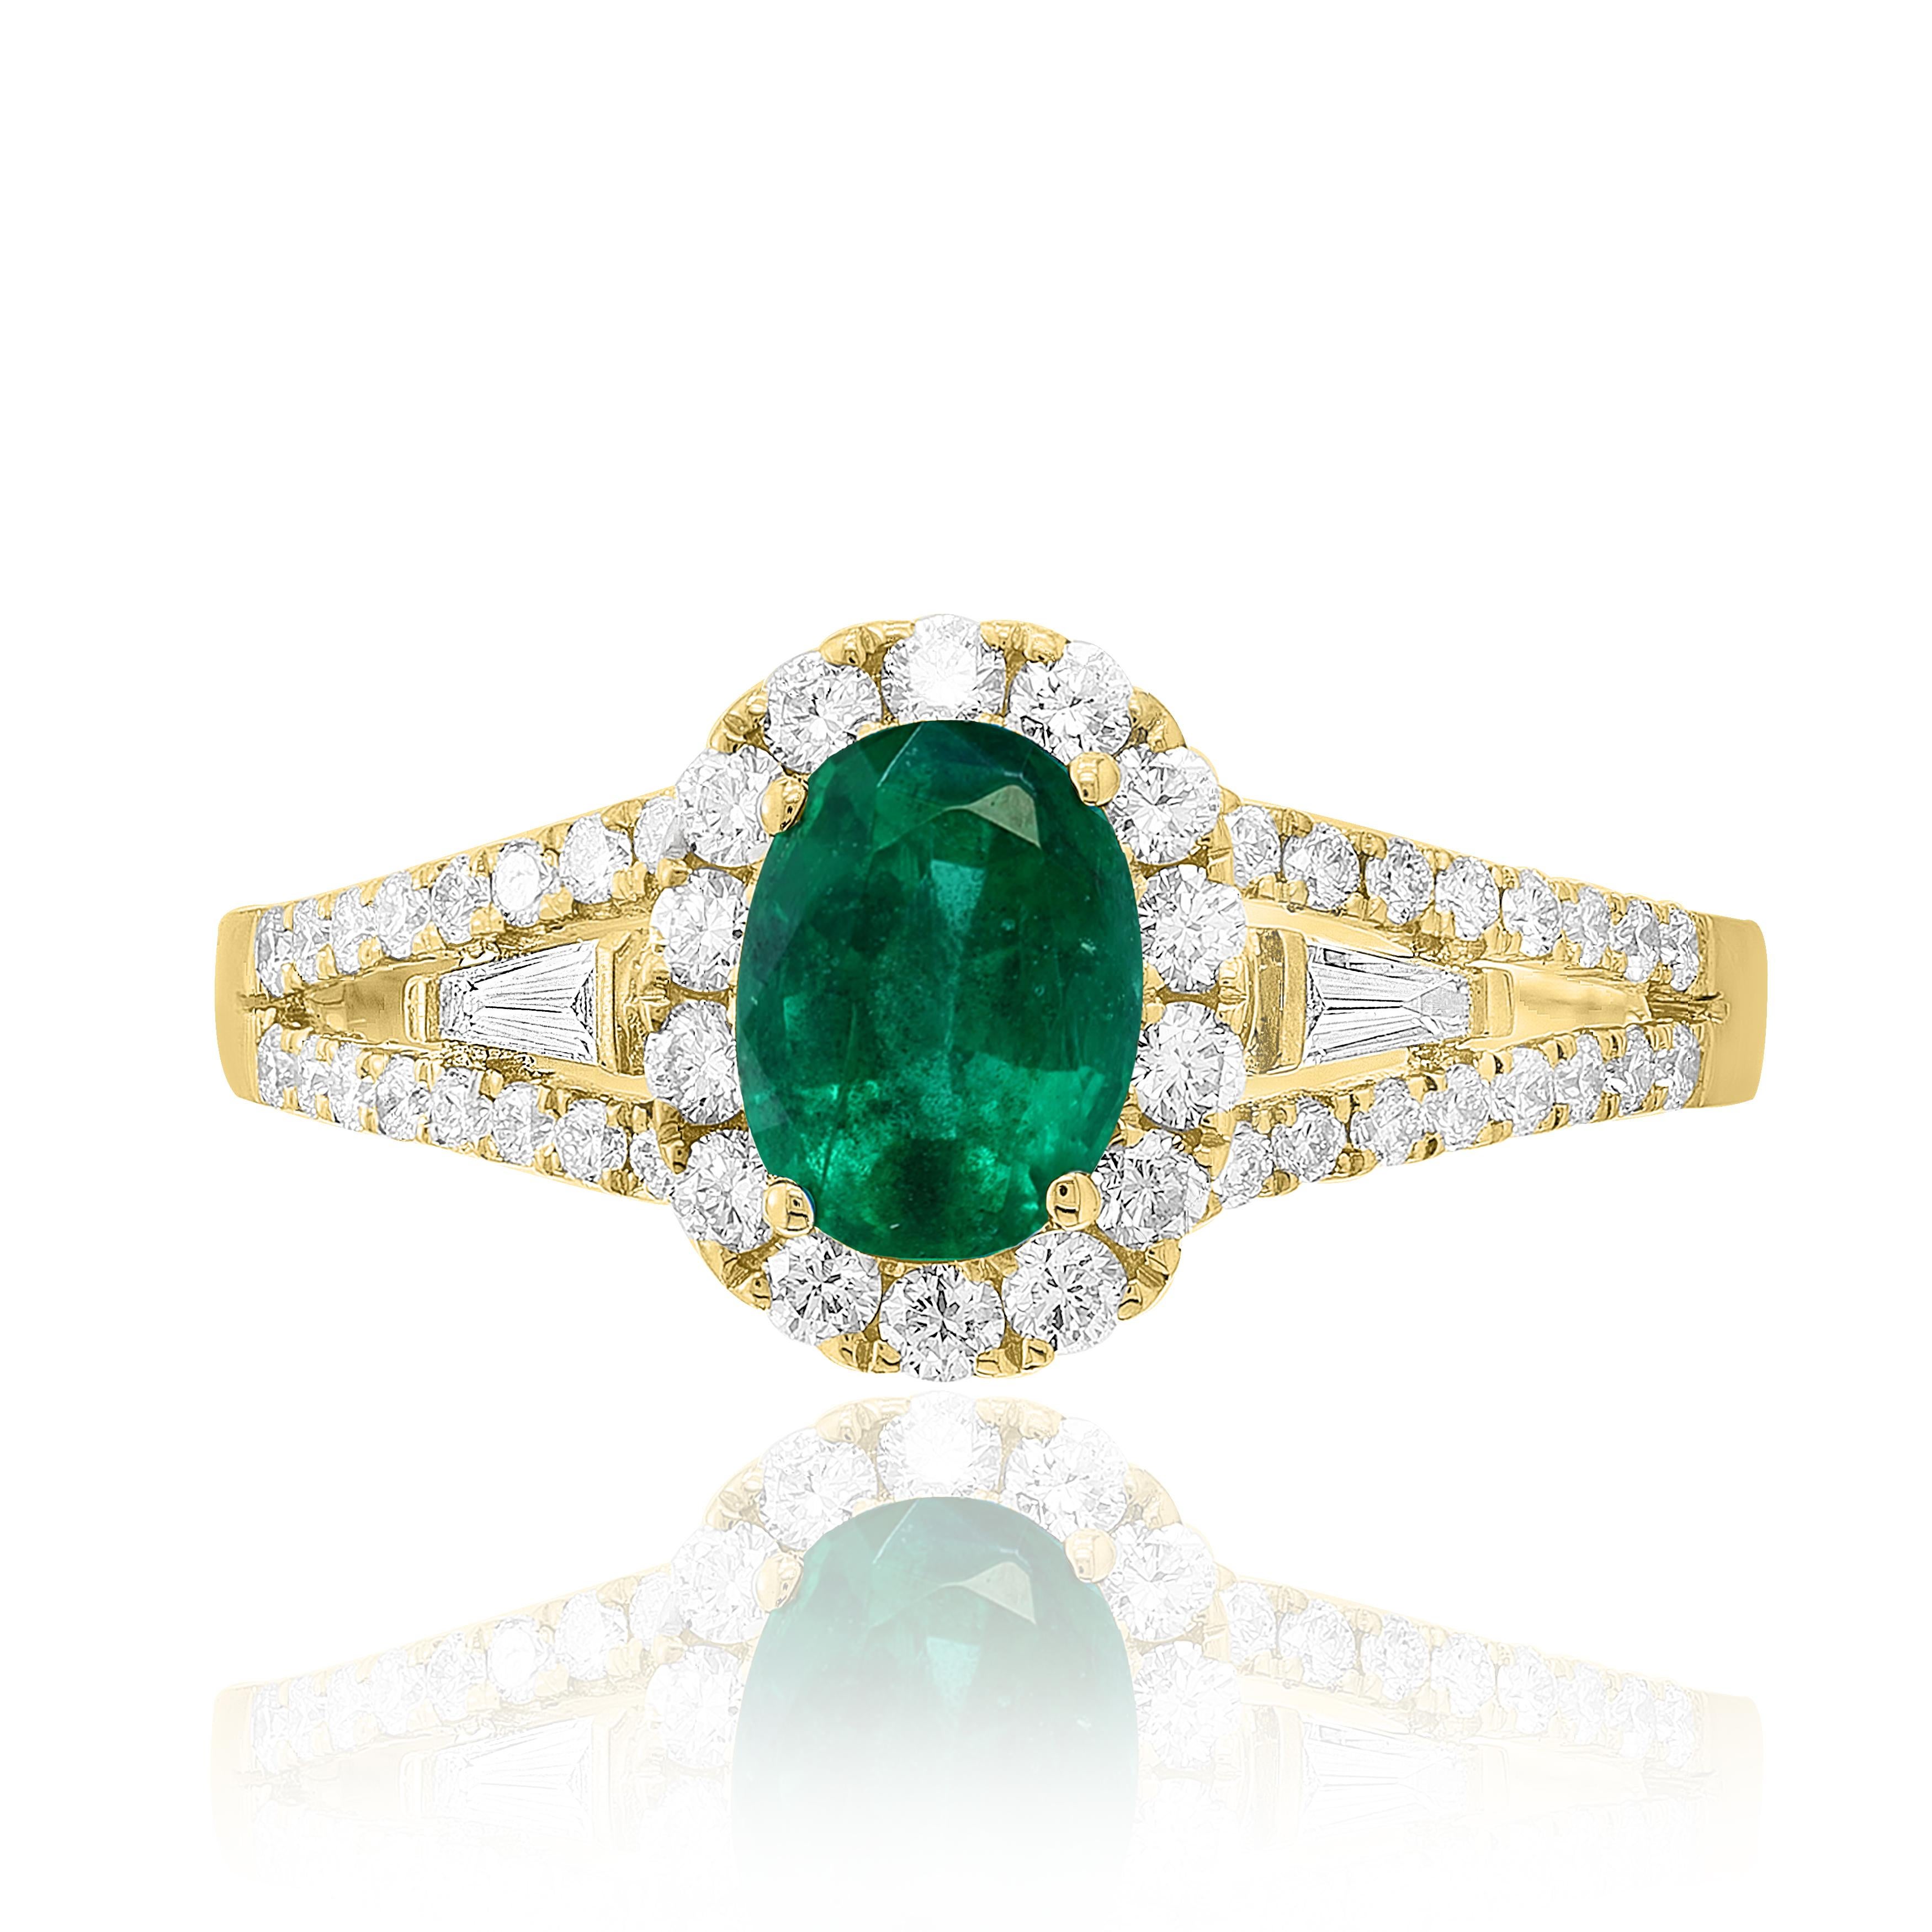 A fashionable and classic ring showcasing color-rich oval cut emerald weighing 0.73 carats total. Surrounded by a row of brilliant cut 48 accent diamonds weighing 0.52 carats in total. made in 18K  yellow gold. A versatile piece that can be worn as